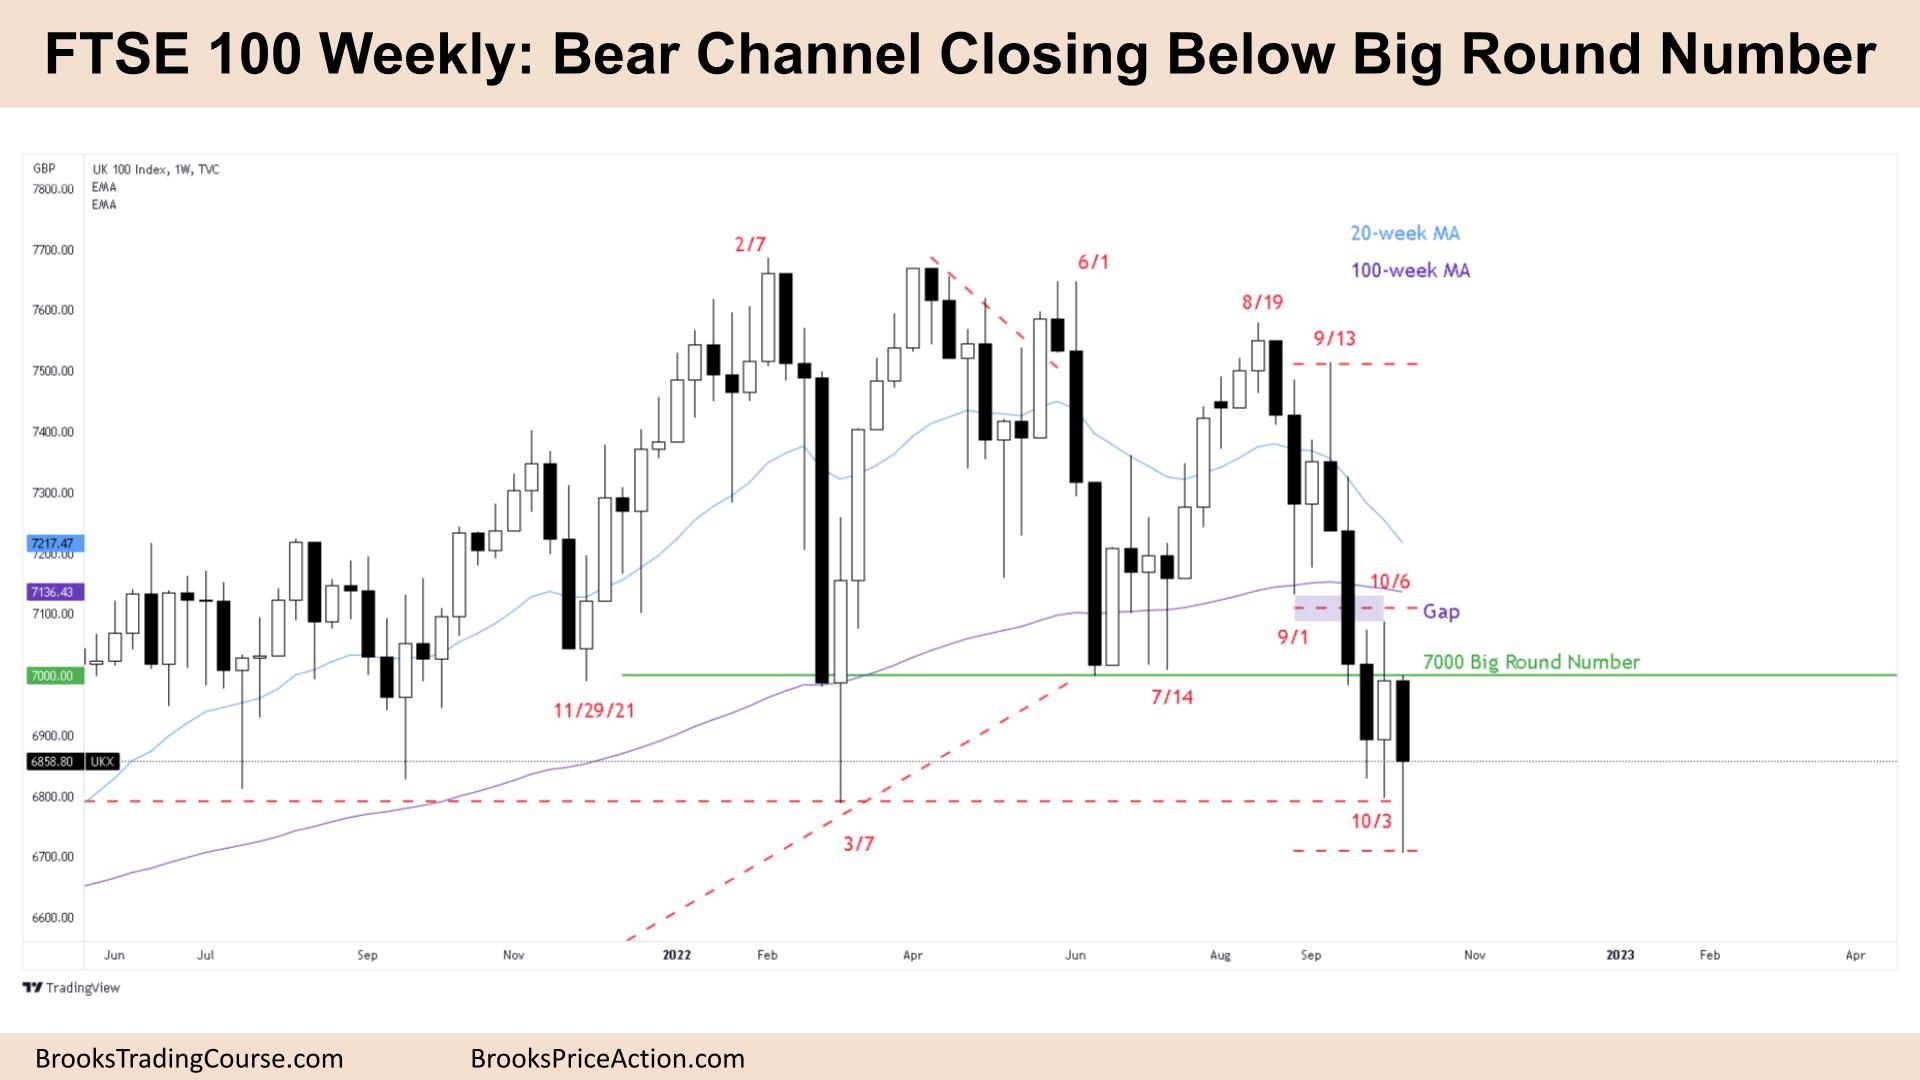 FTSE 100 Bear Channel Closing Below Big Round Number on Weekly Chart